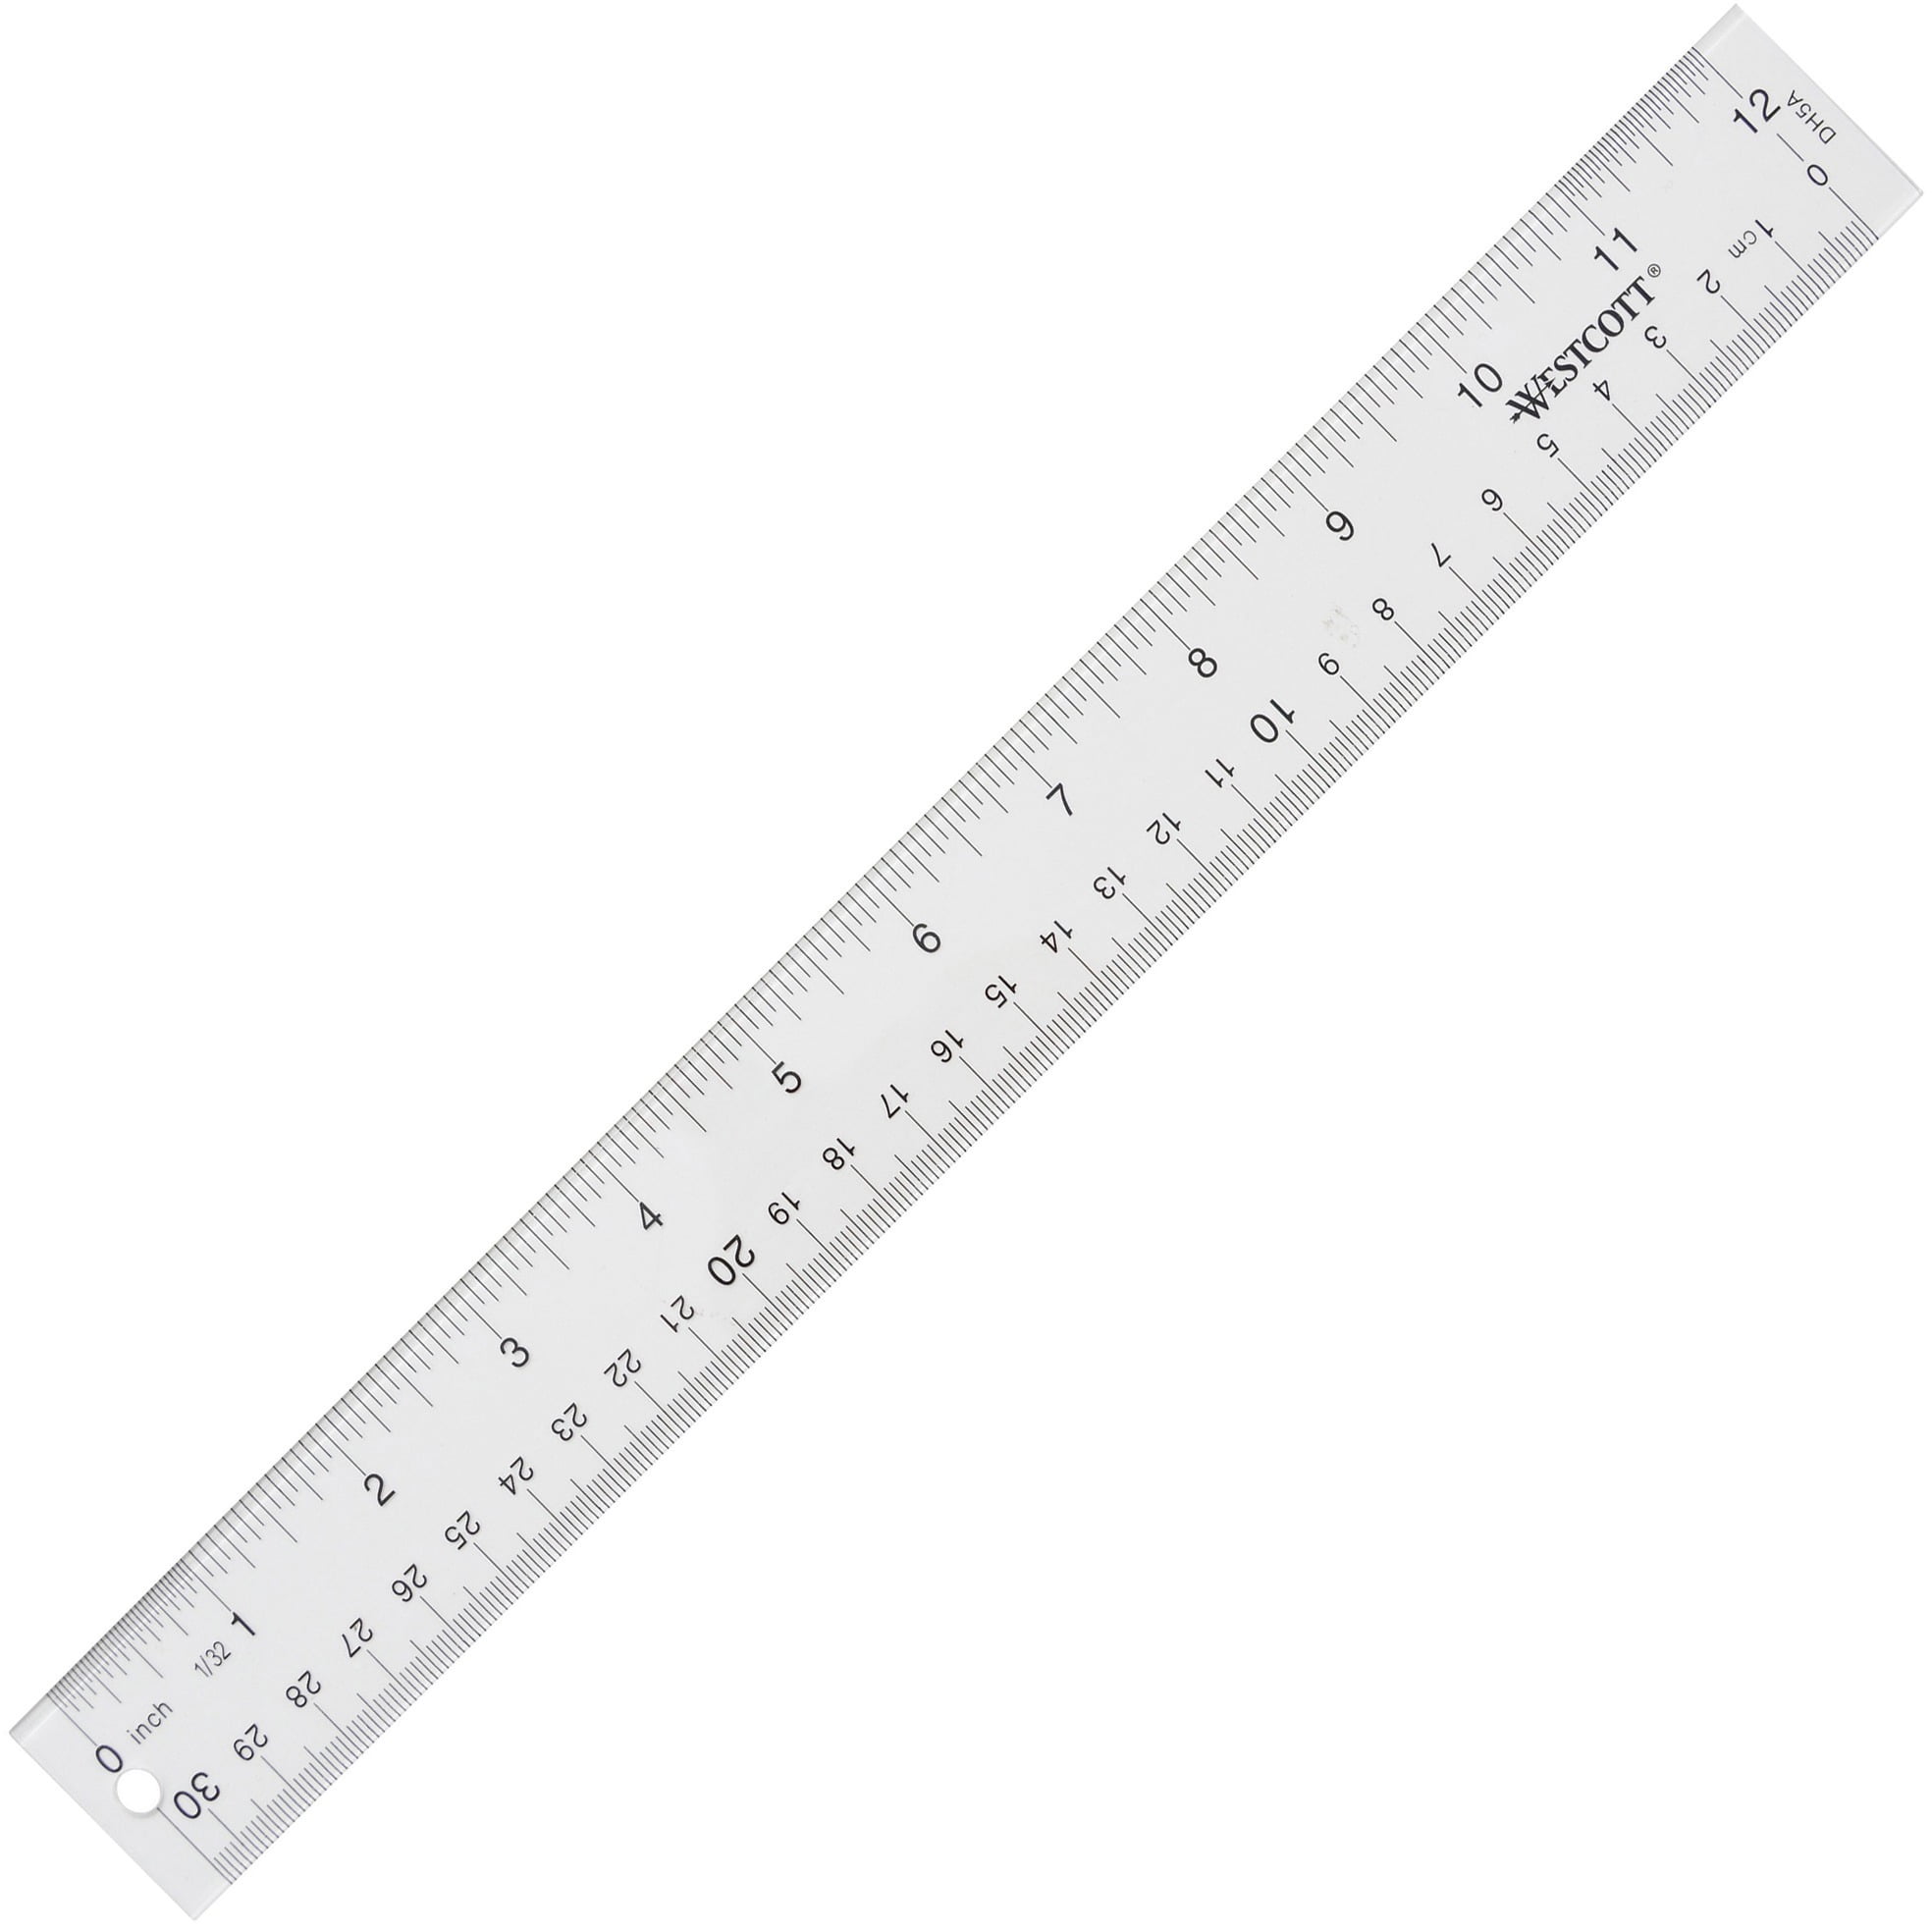 Heldig Supplies 4 Plastic Rulers, Bulk Shatterproof 12 Inch Ruler for  School, Home, or Office, Clear Plastic Rulers, 4Assorted Colors 